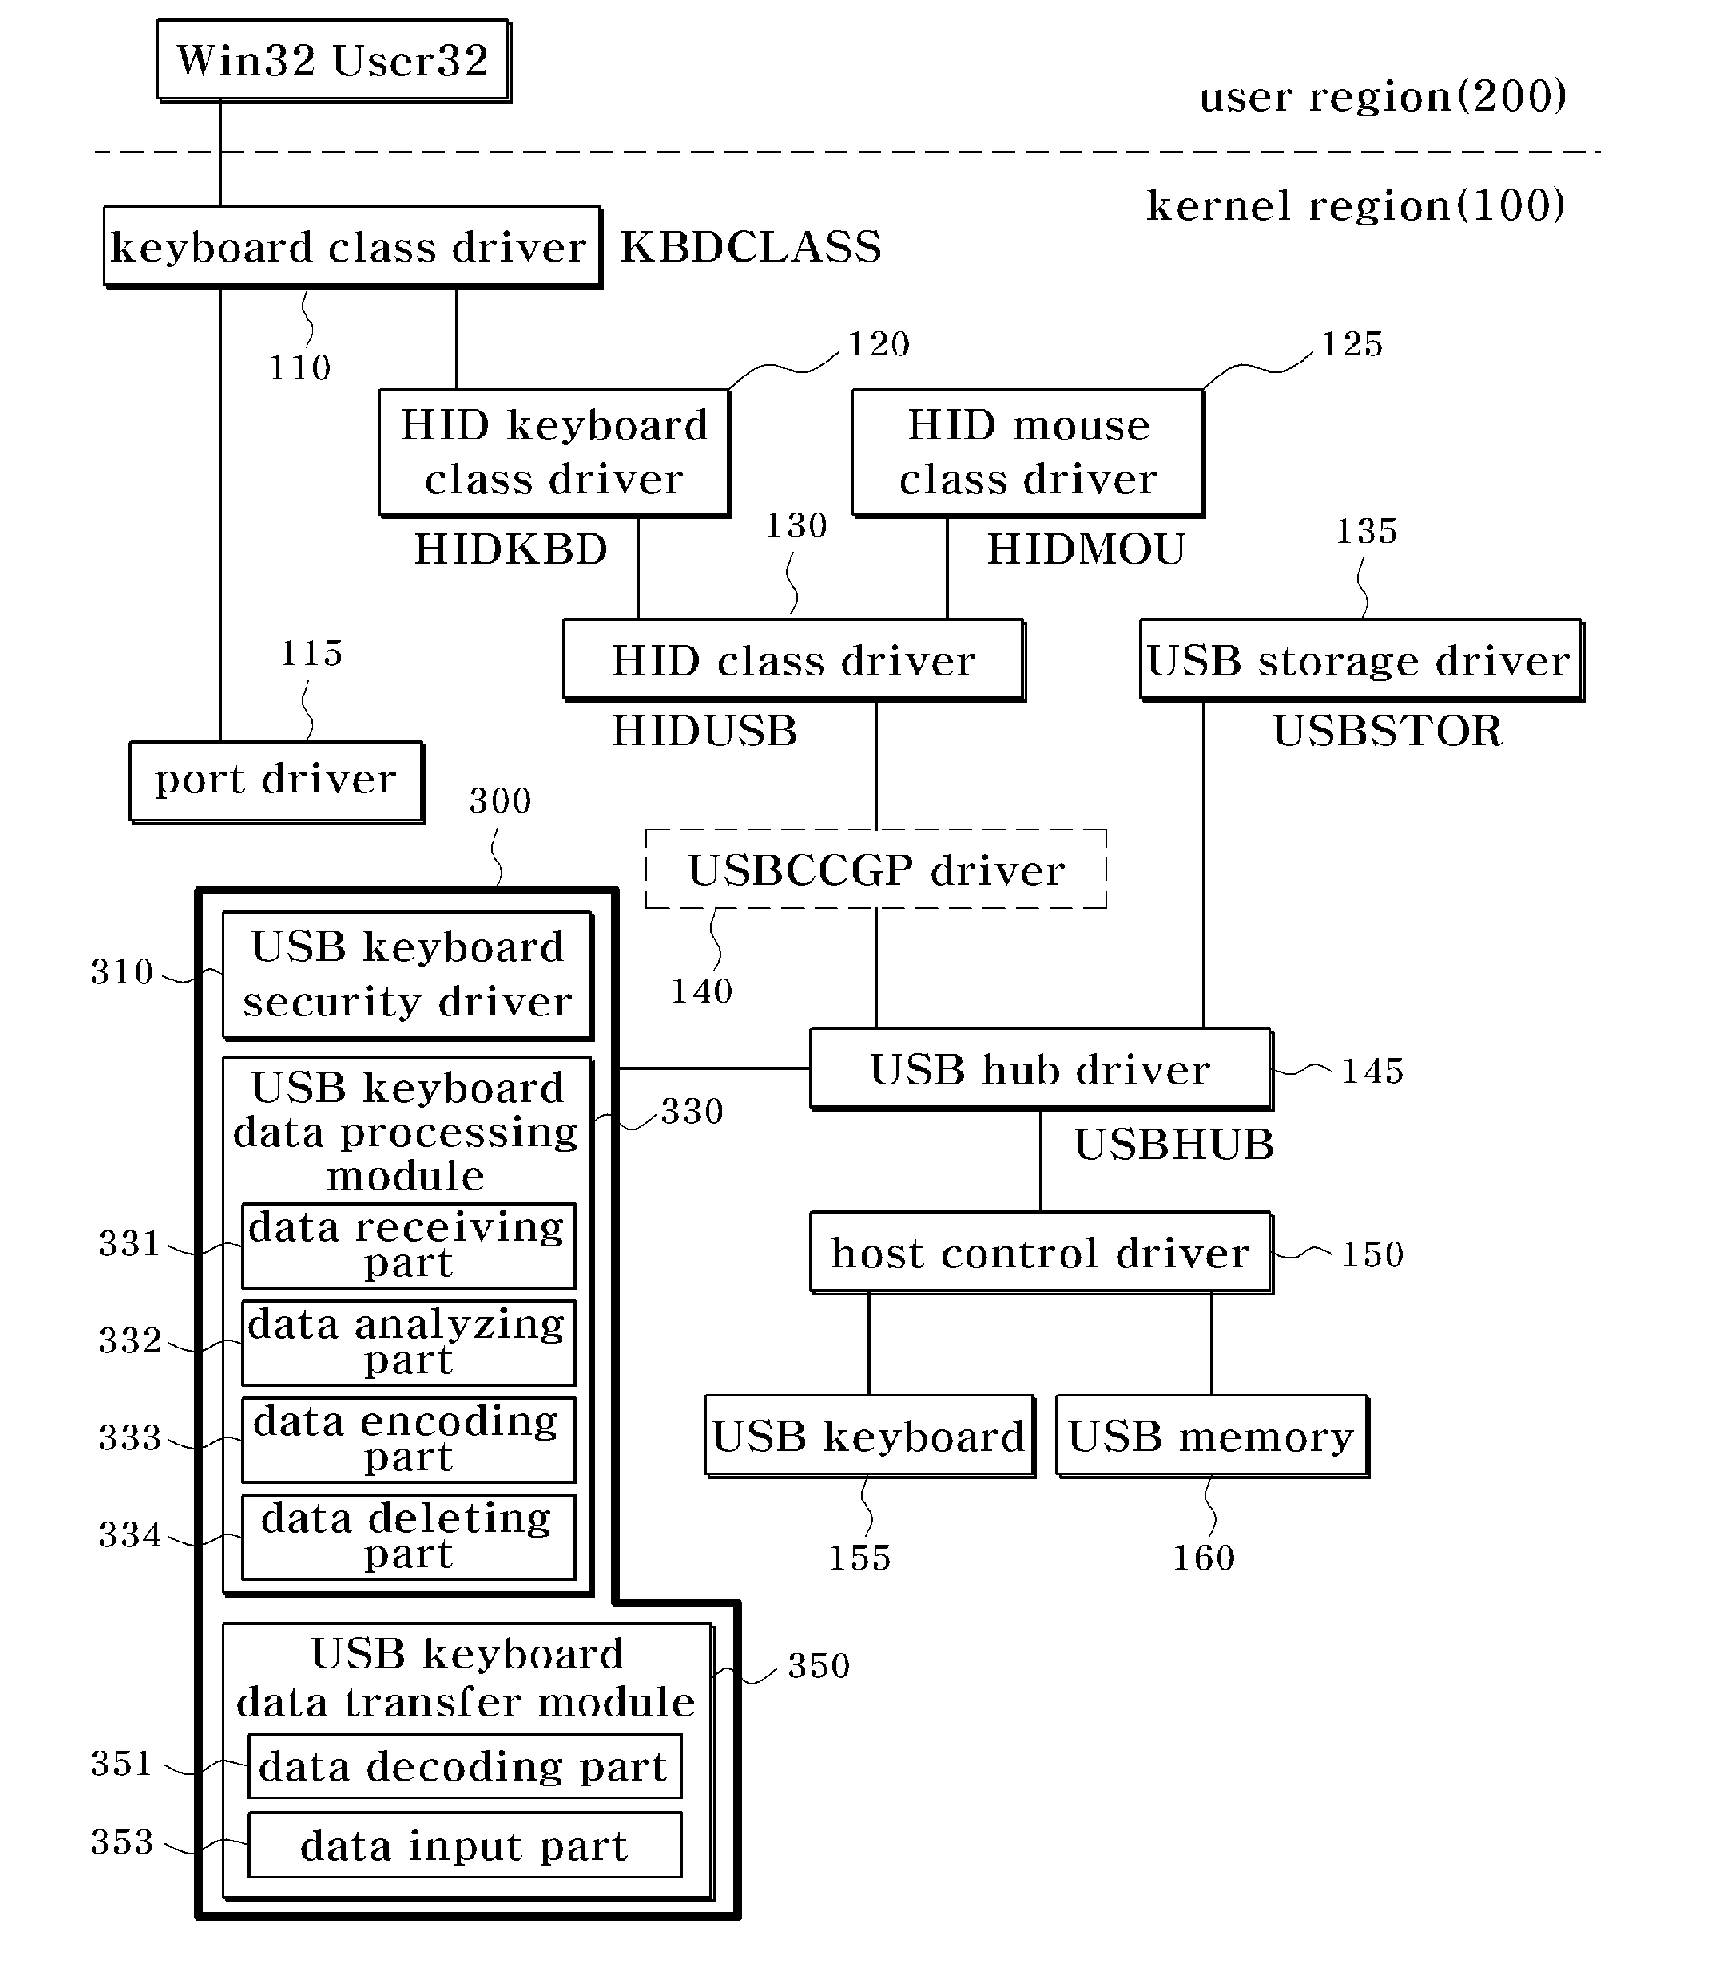 Apparatus and Method for Preservation of USB Keyboard